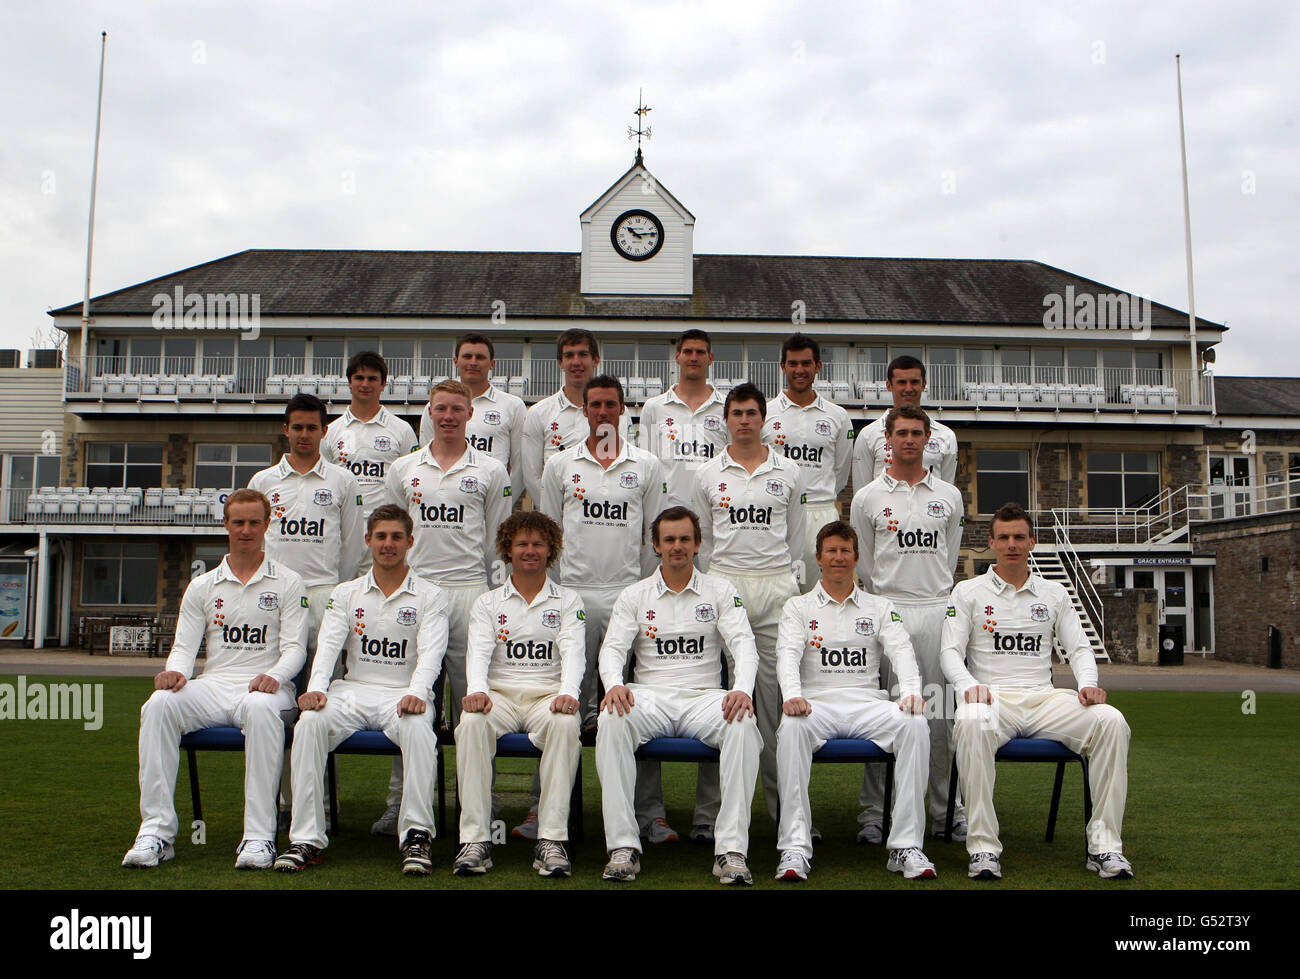 The Gloucestershire CCC team of (bottom row left to right) Ian Saxelby, Chris Dent , Hamish Marshall, Captain Alex Gidman, Jonathan Batty,Will Gidman (middle row left to right) Jack Taylor, Liam Norwell, David Wade ,James Fuller, Ian Cockbain, (top row left to right) Richard Coughtrie, Paul Muchall, Graeme McCarter, David Payne, Ed Young, Dan Housego pose for a team photo during the press day at the County Ground, Bristol. Stock Photo